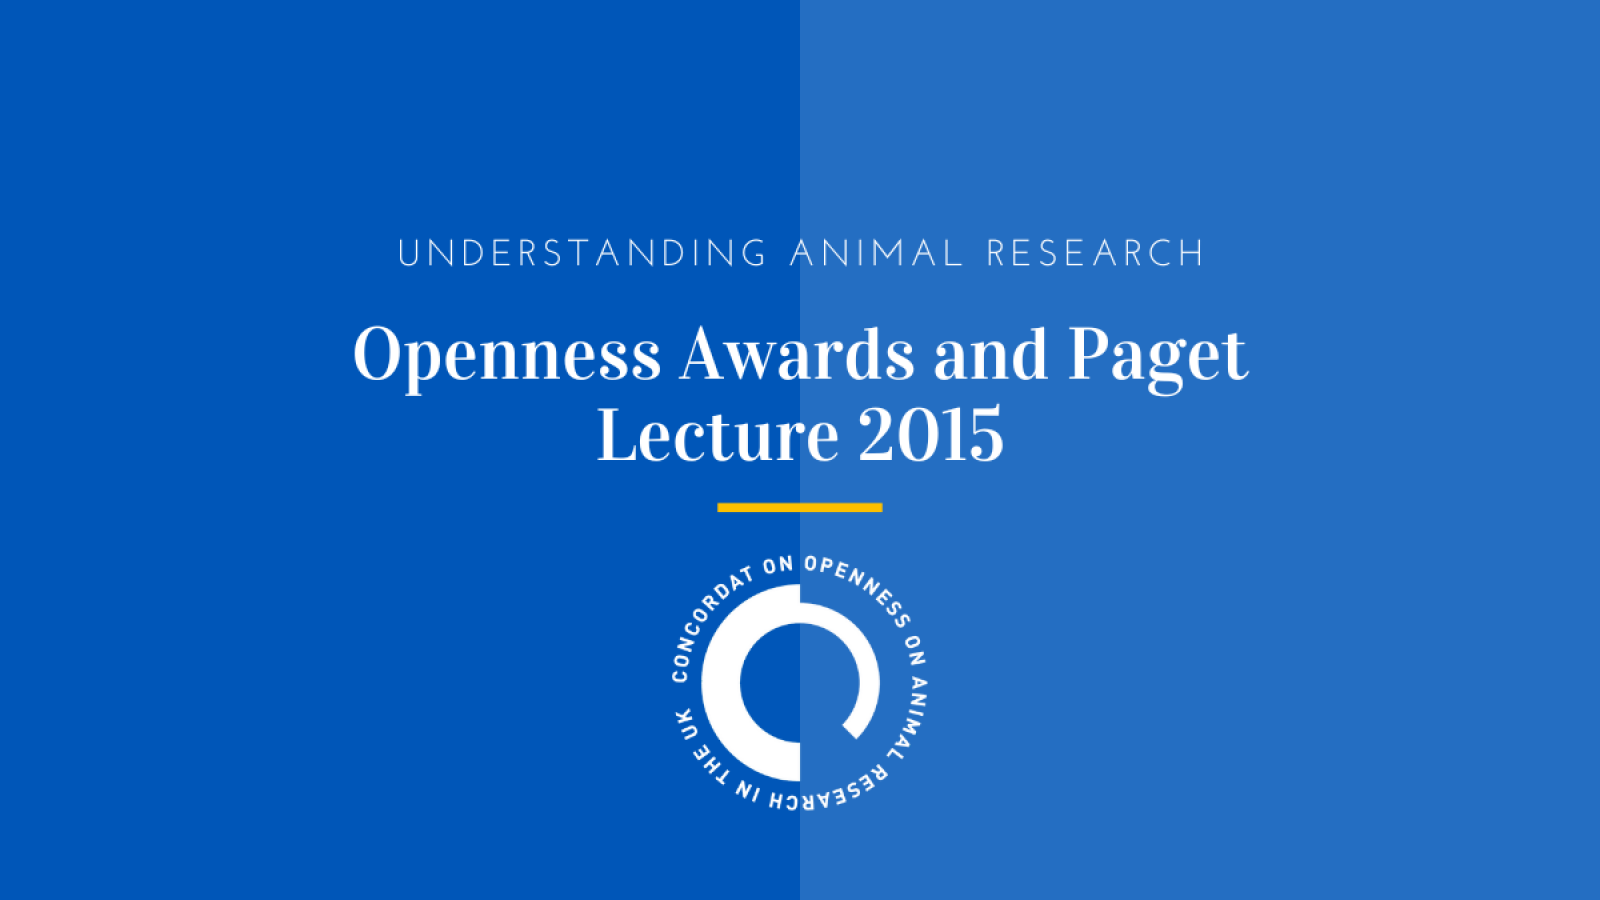 Openness Awards and Paget Lecture 2015